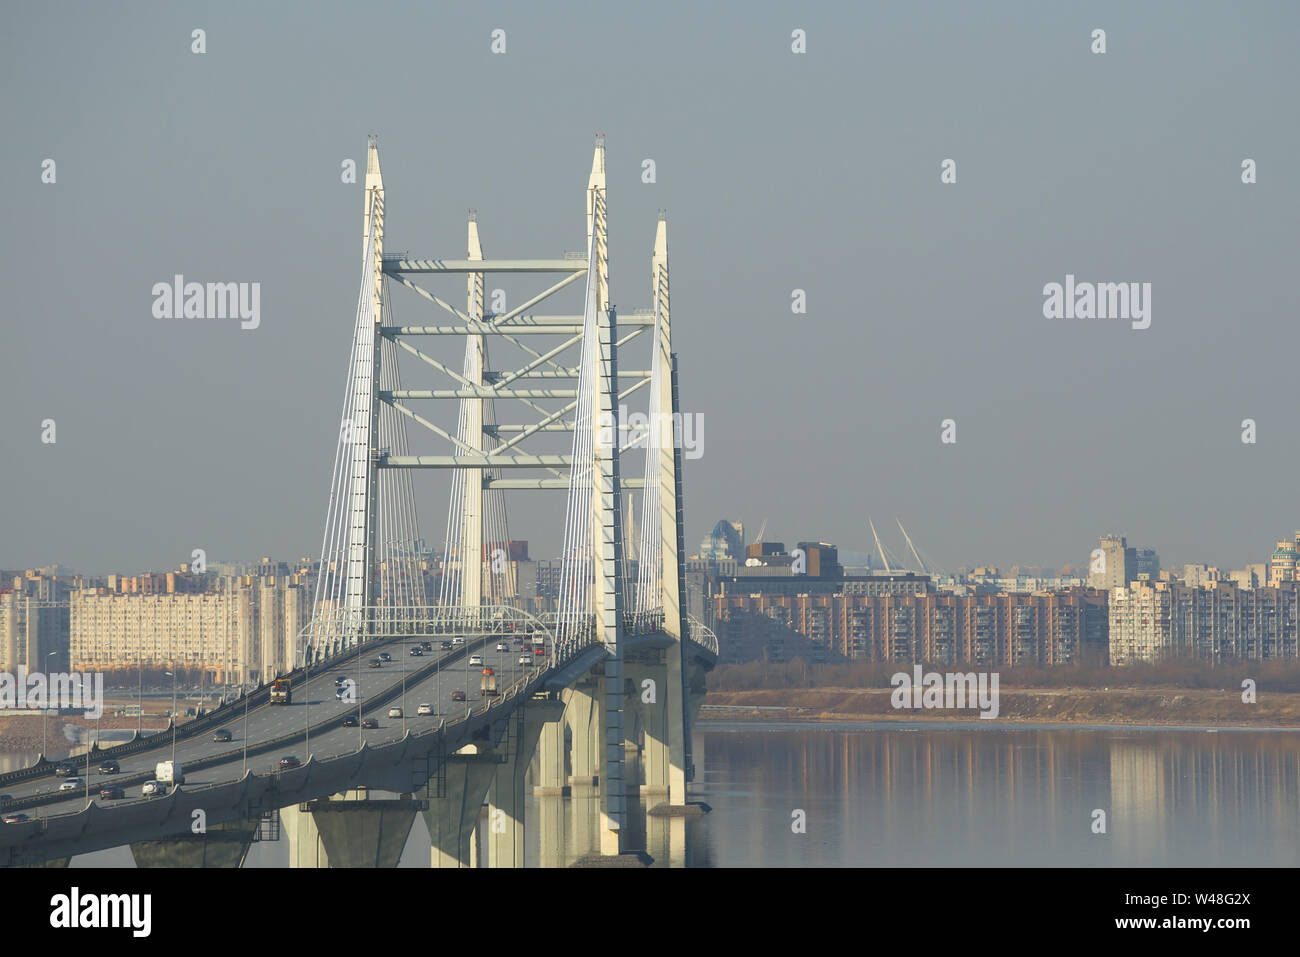 SAINT-PETERSBURG, RUSSIA - APRIL 05, 2019: View of the cable-stayed bridge on the Western High-Speed Diameter of the ring road on April day Stock Photo